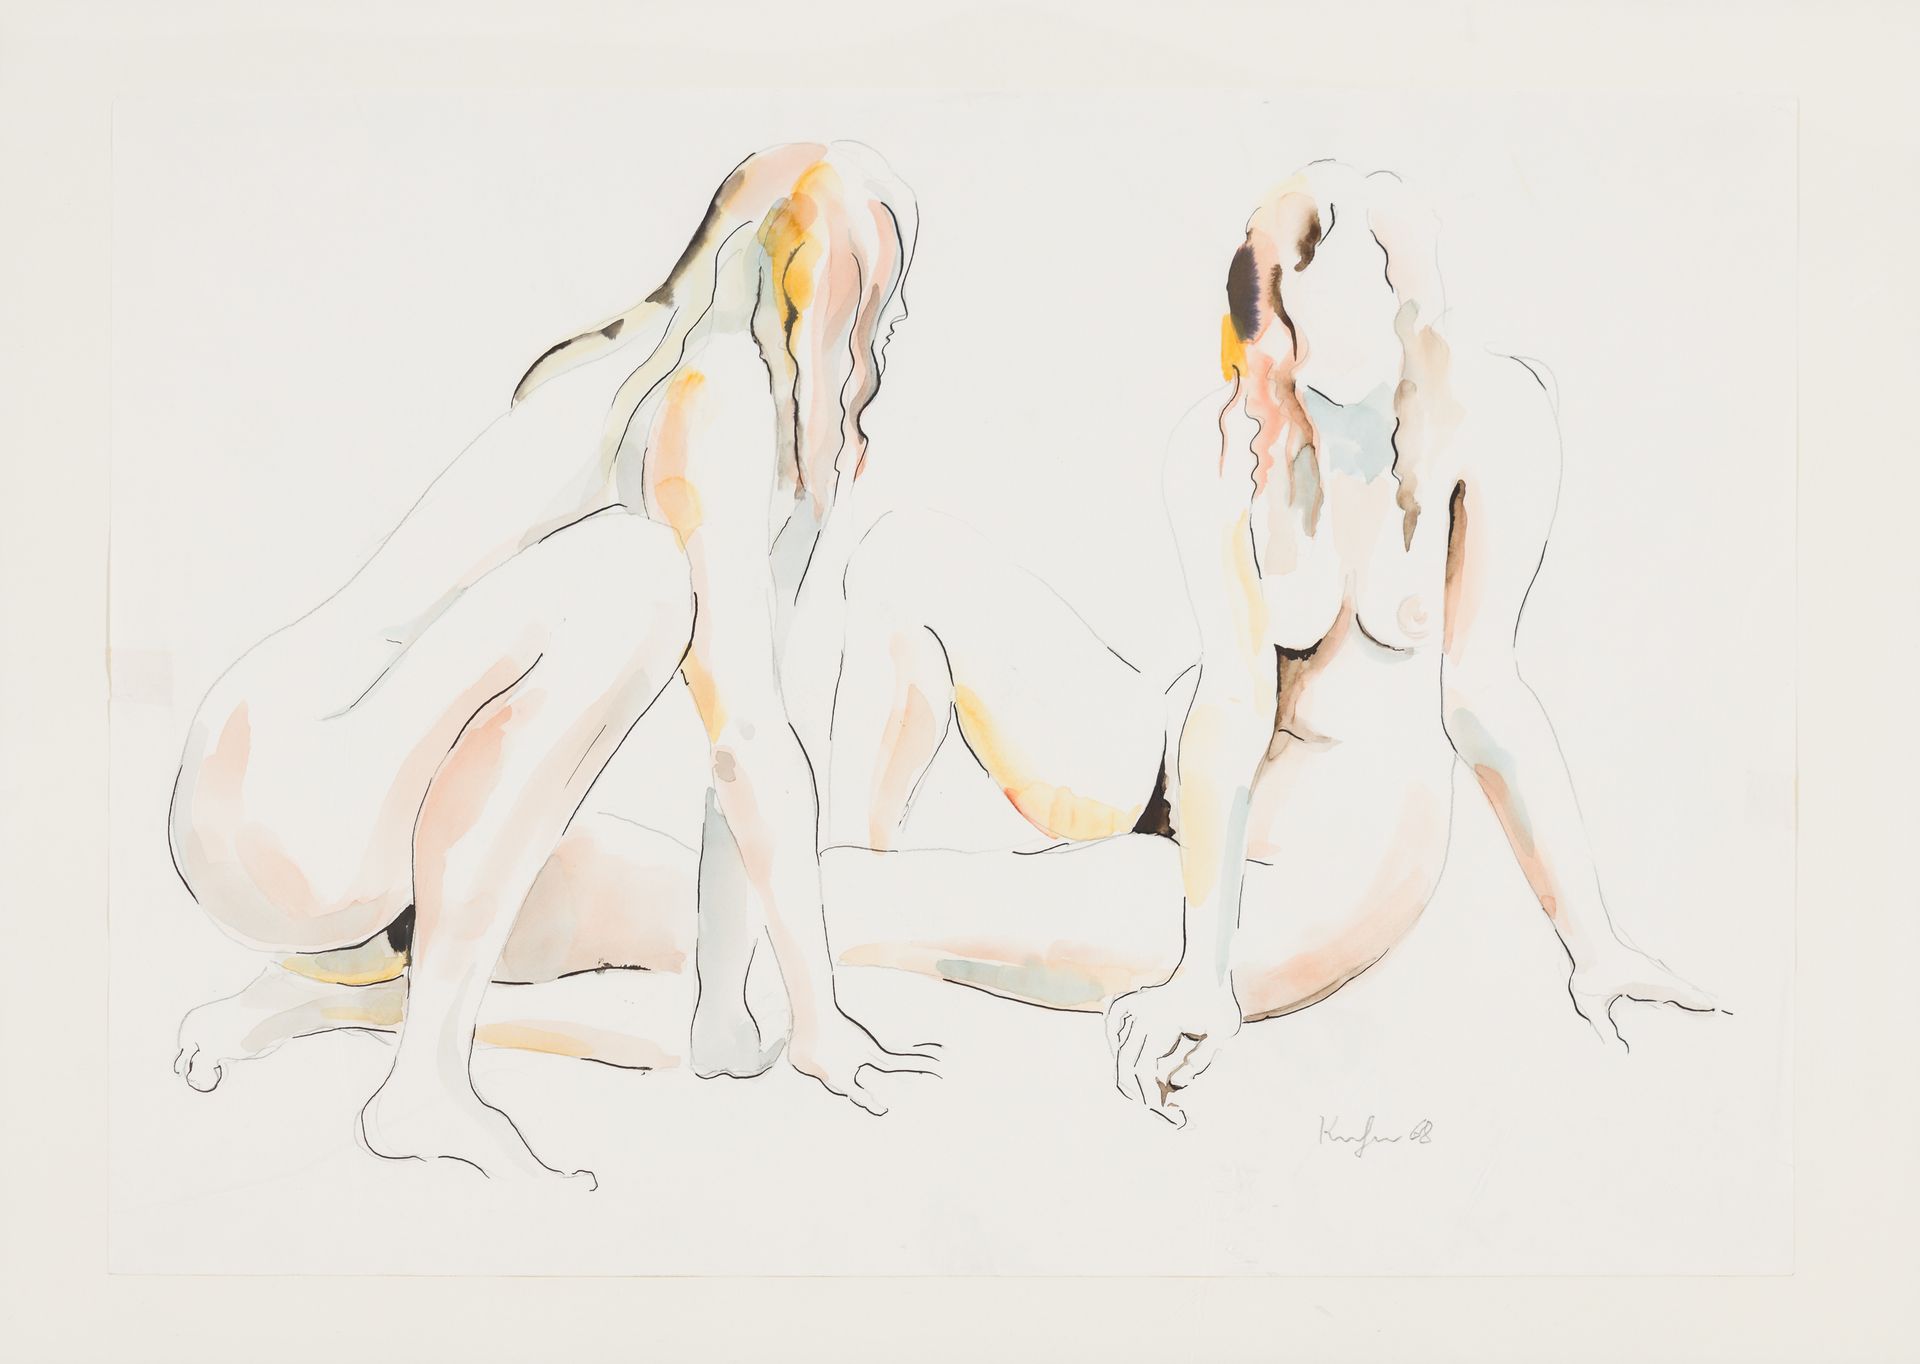 Kornberger, Alfred Two nudes, 1968
Watercolor, graphite and ink on paper
Signed &hellip;